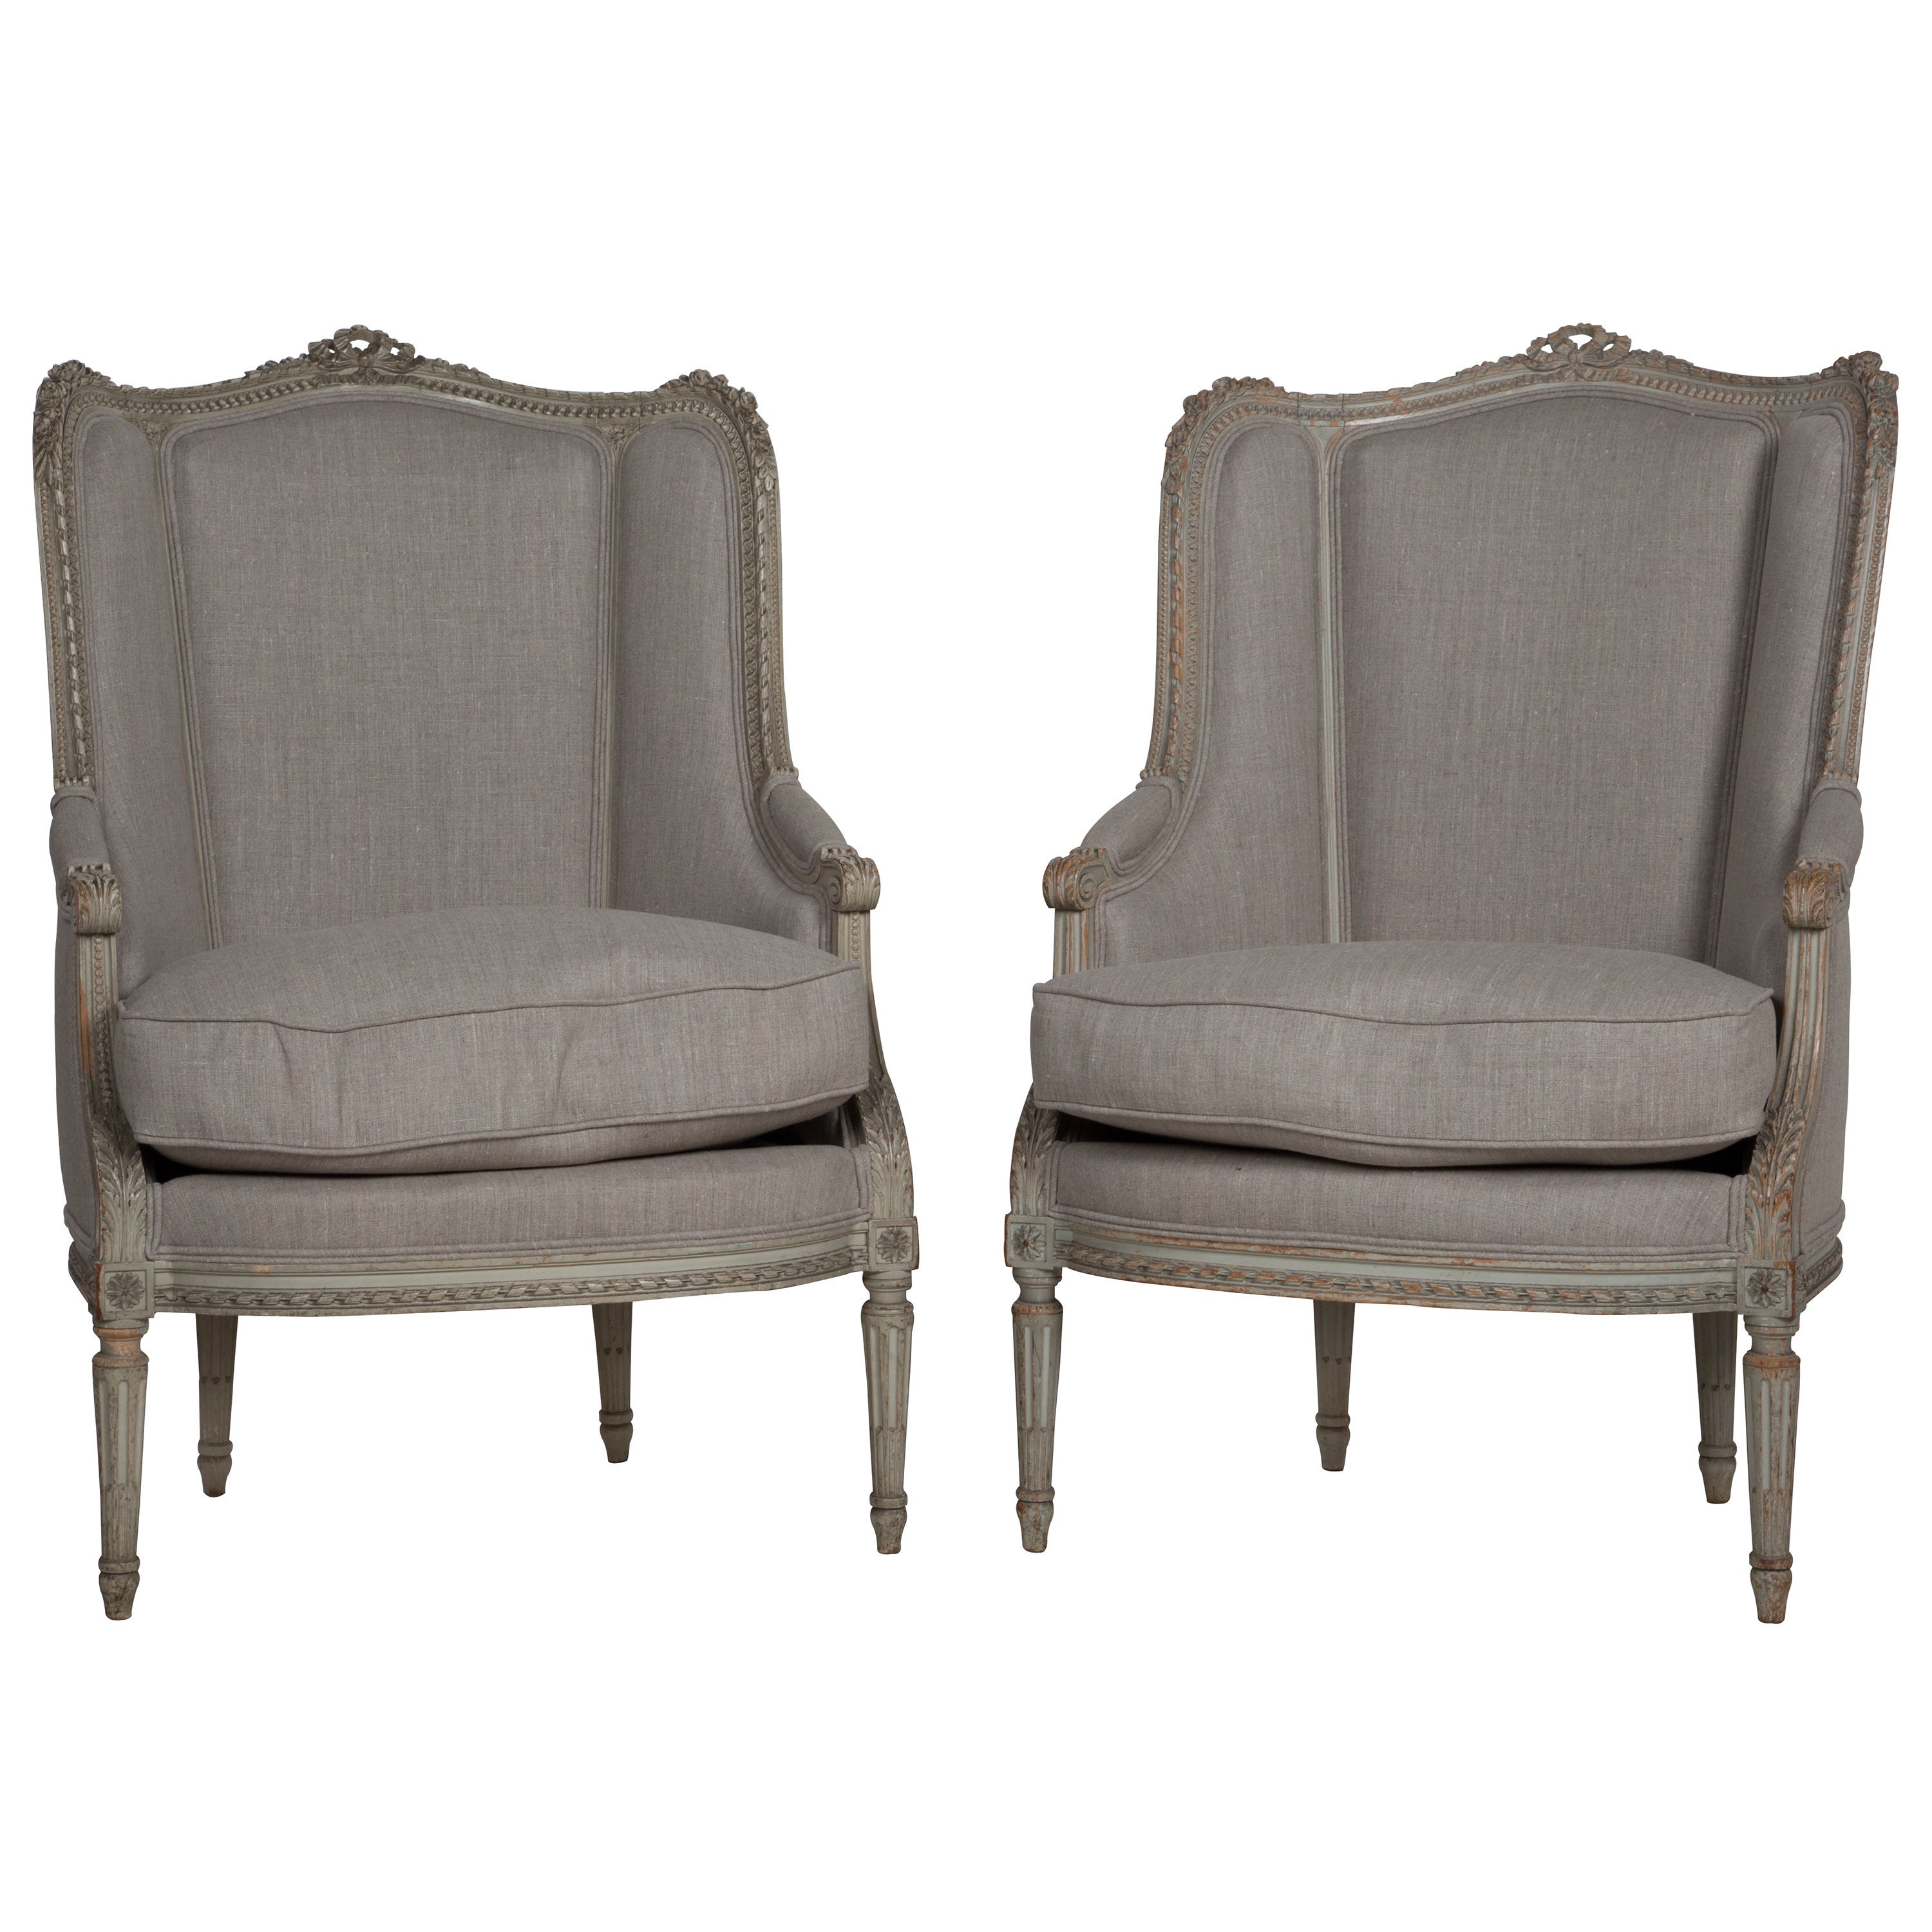 Pair of Painted Wing Armchairs